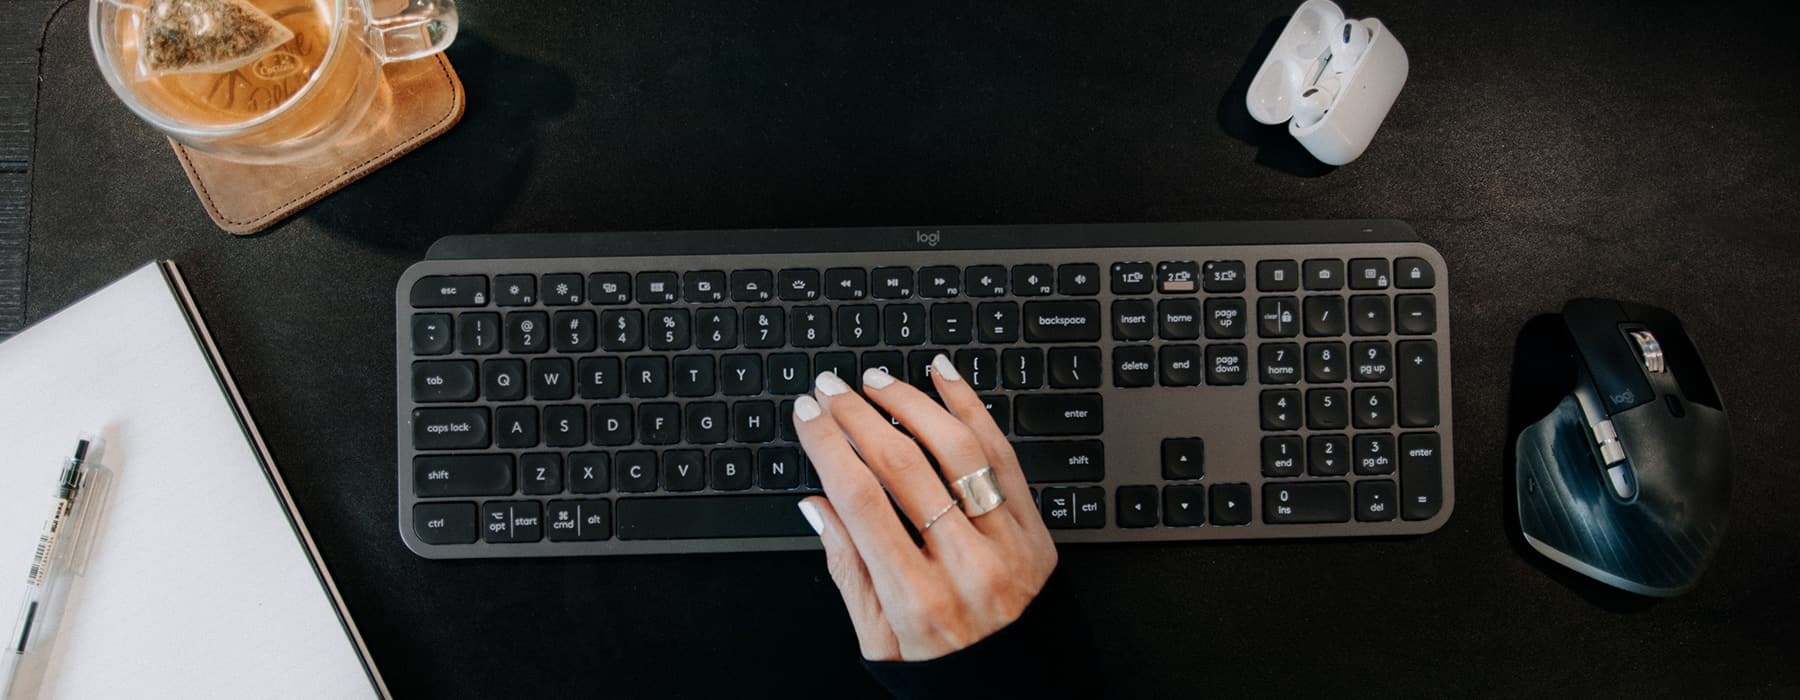 lifestyle image of a woman's hand typing on a black keyboard